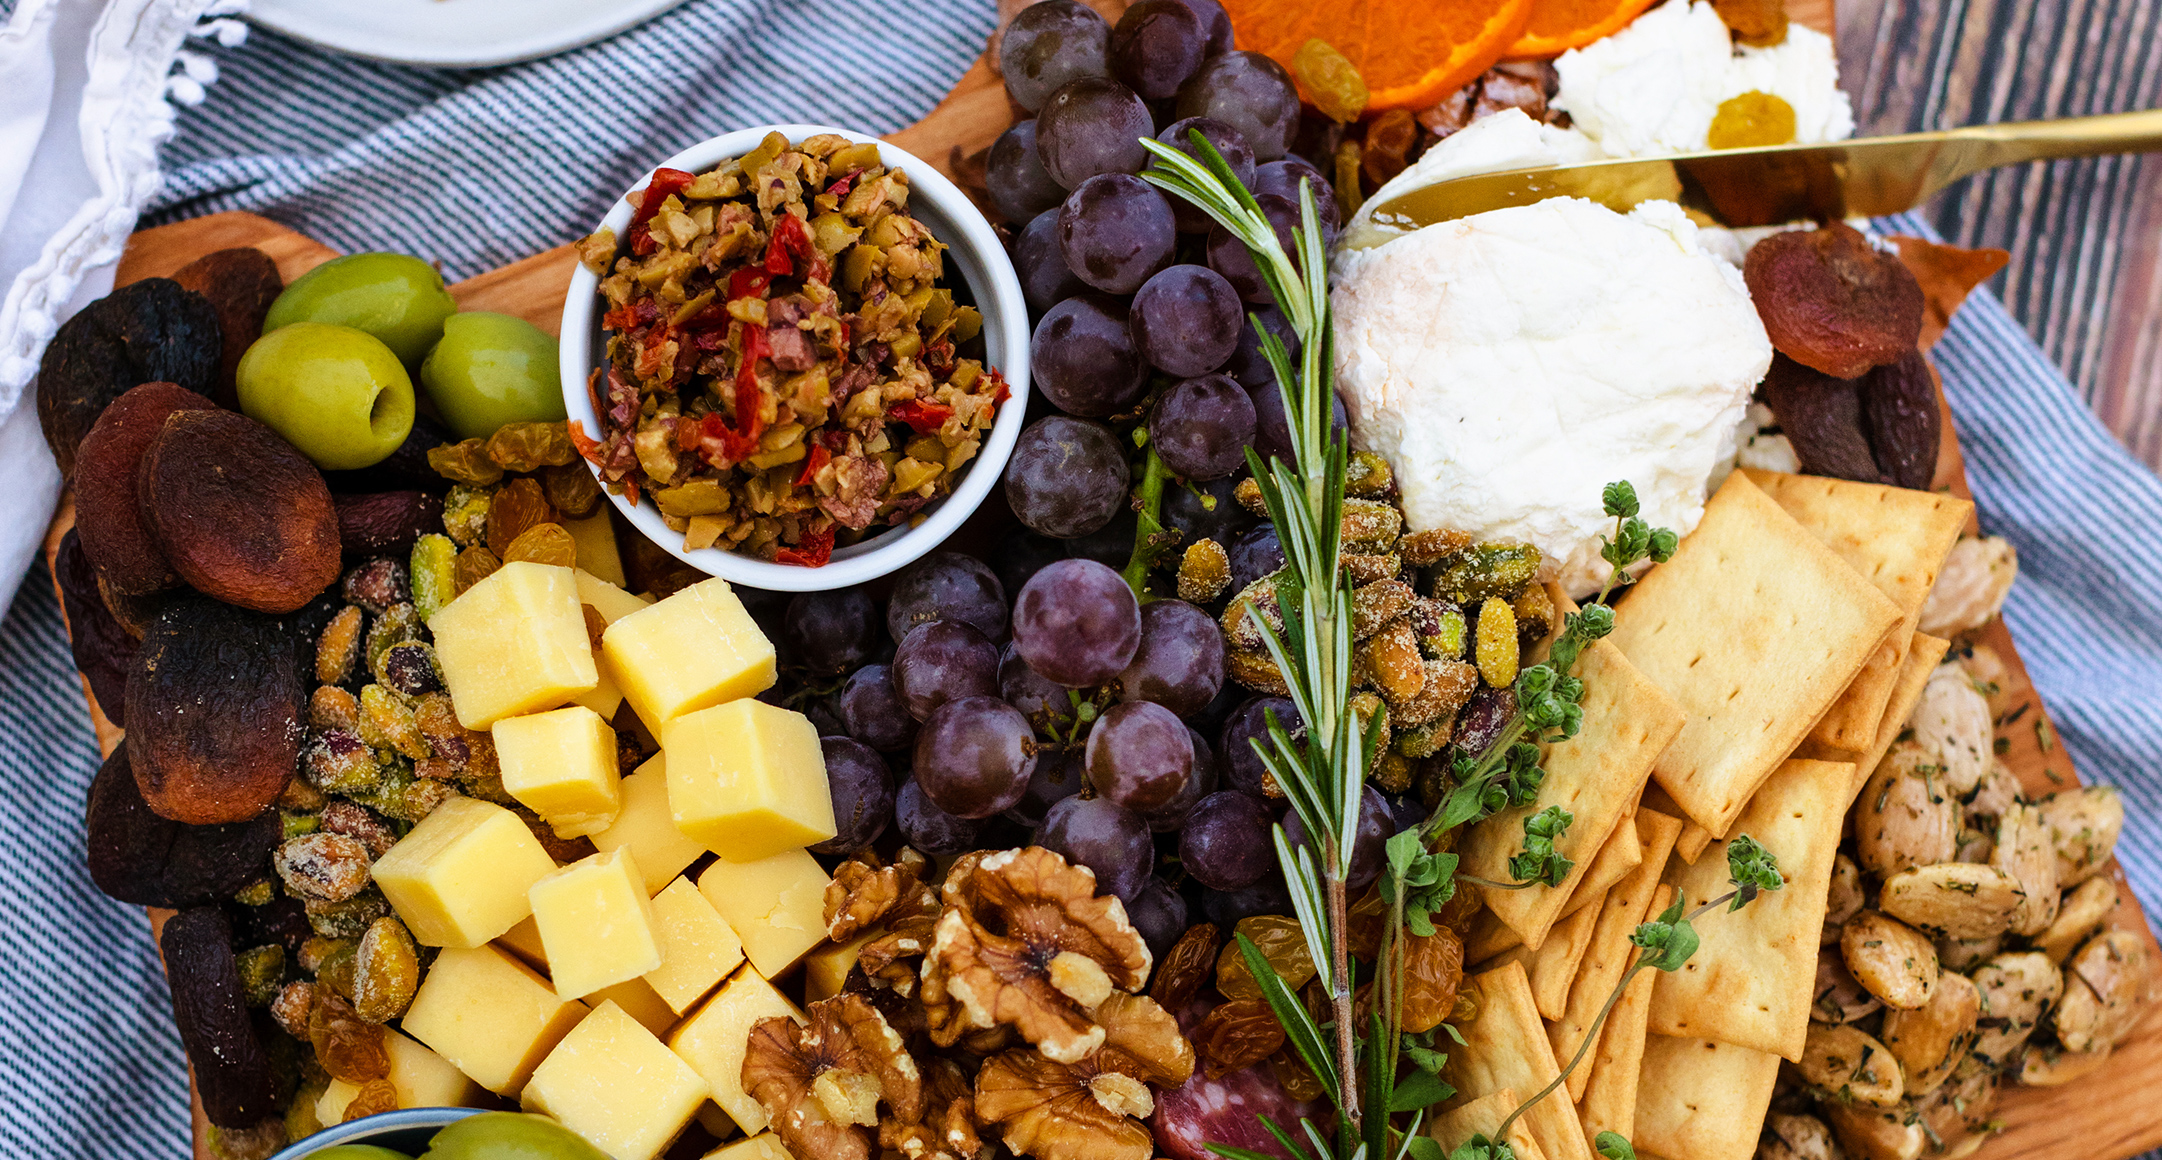 a bountiful cheese board with fruit, nuts, crackers and multiple cheeses on a wooden board set on a blue towel